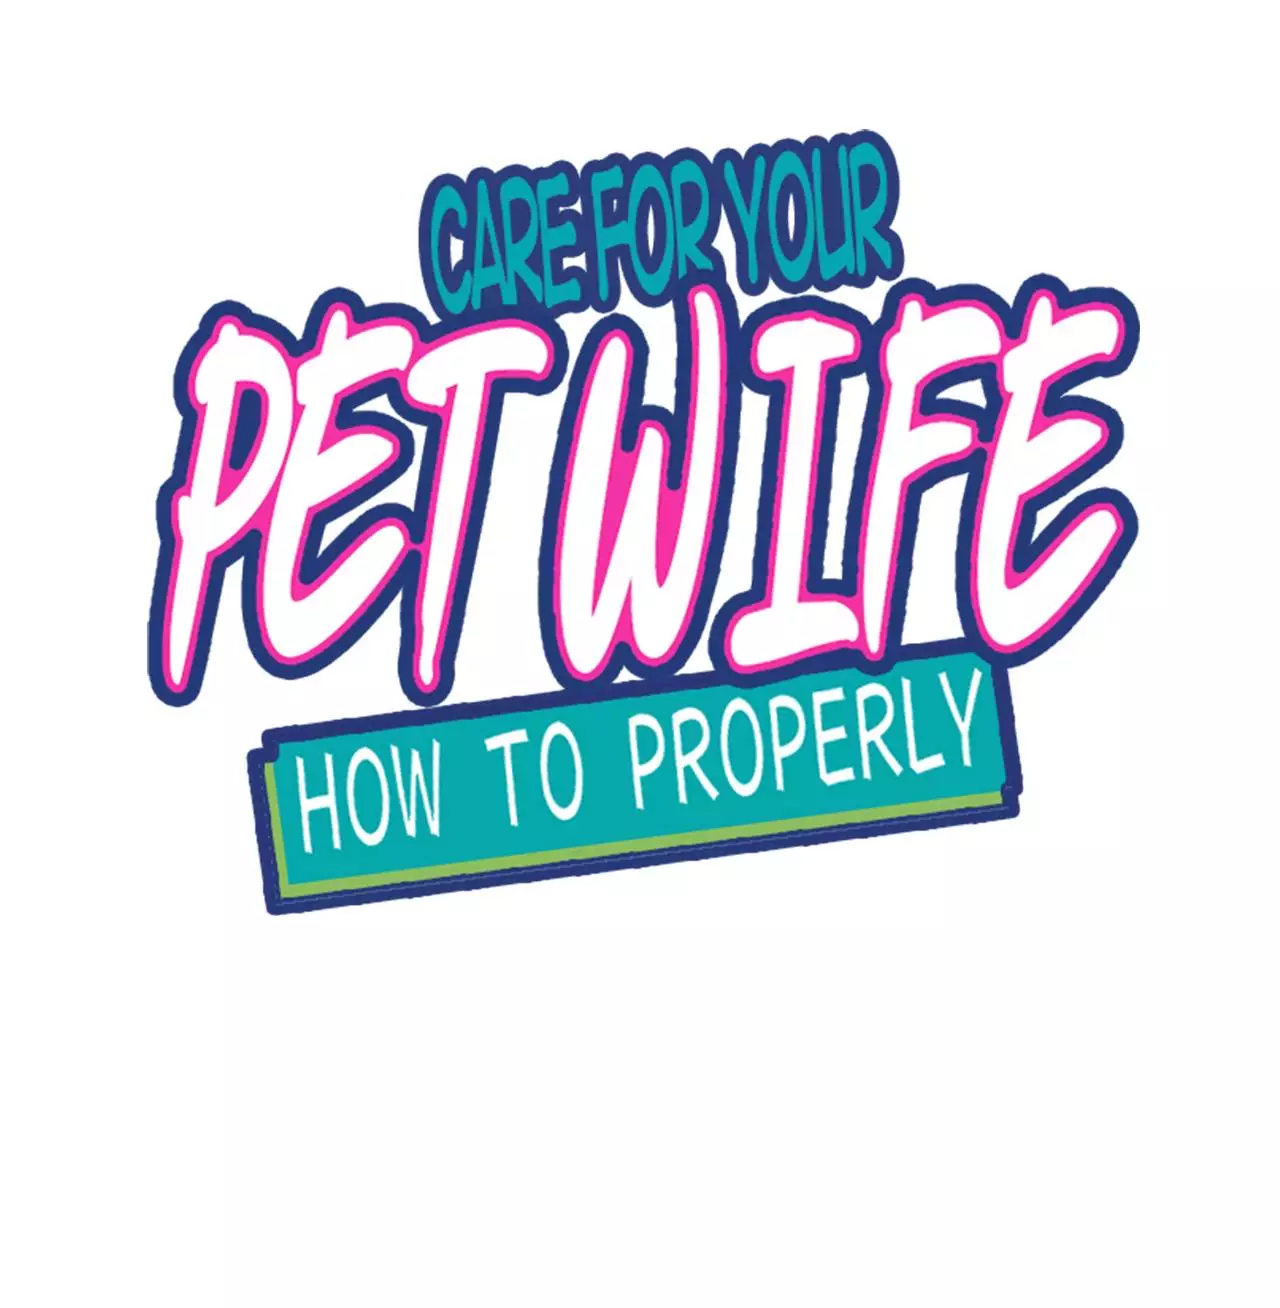 How To Properly Care For Your Pet Wife - 39 page 1-c8c8f6ab